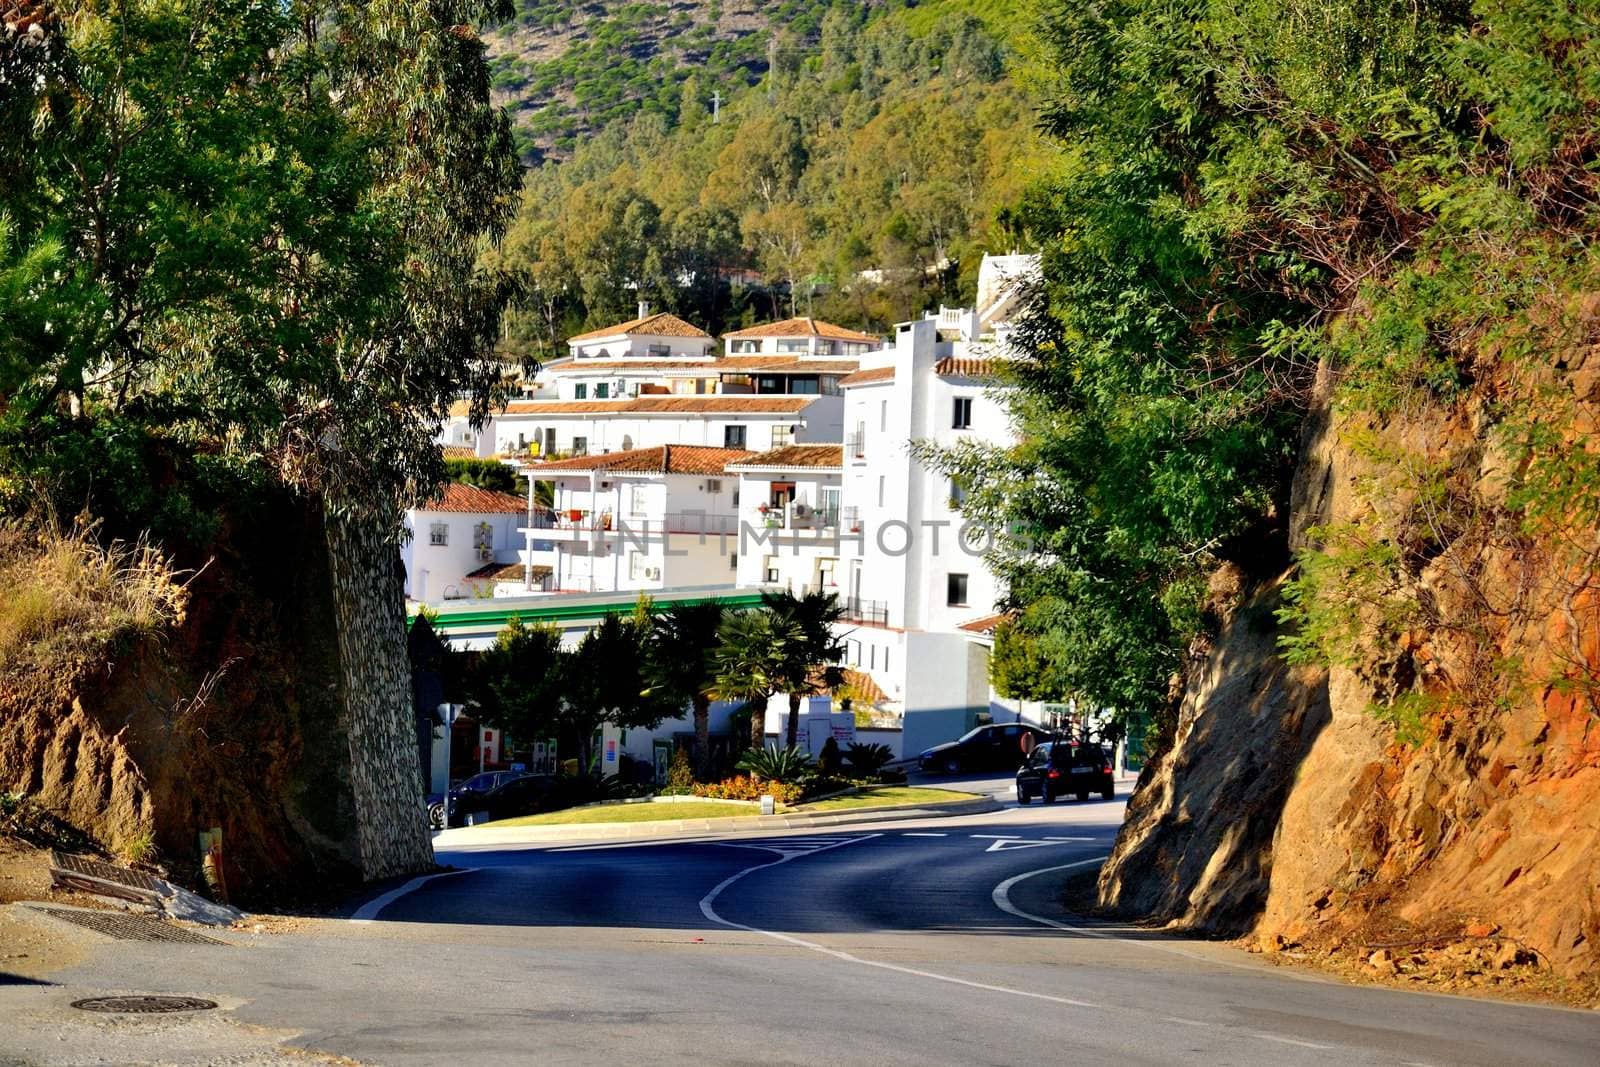 Road leading to mijas, entrance located on the winding roads in the mountains